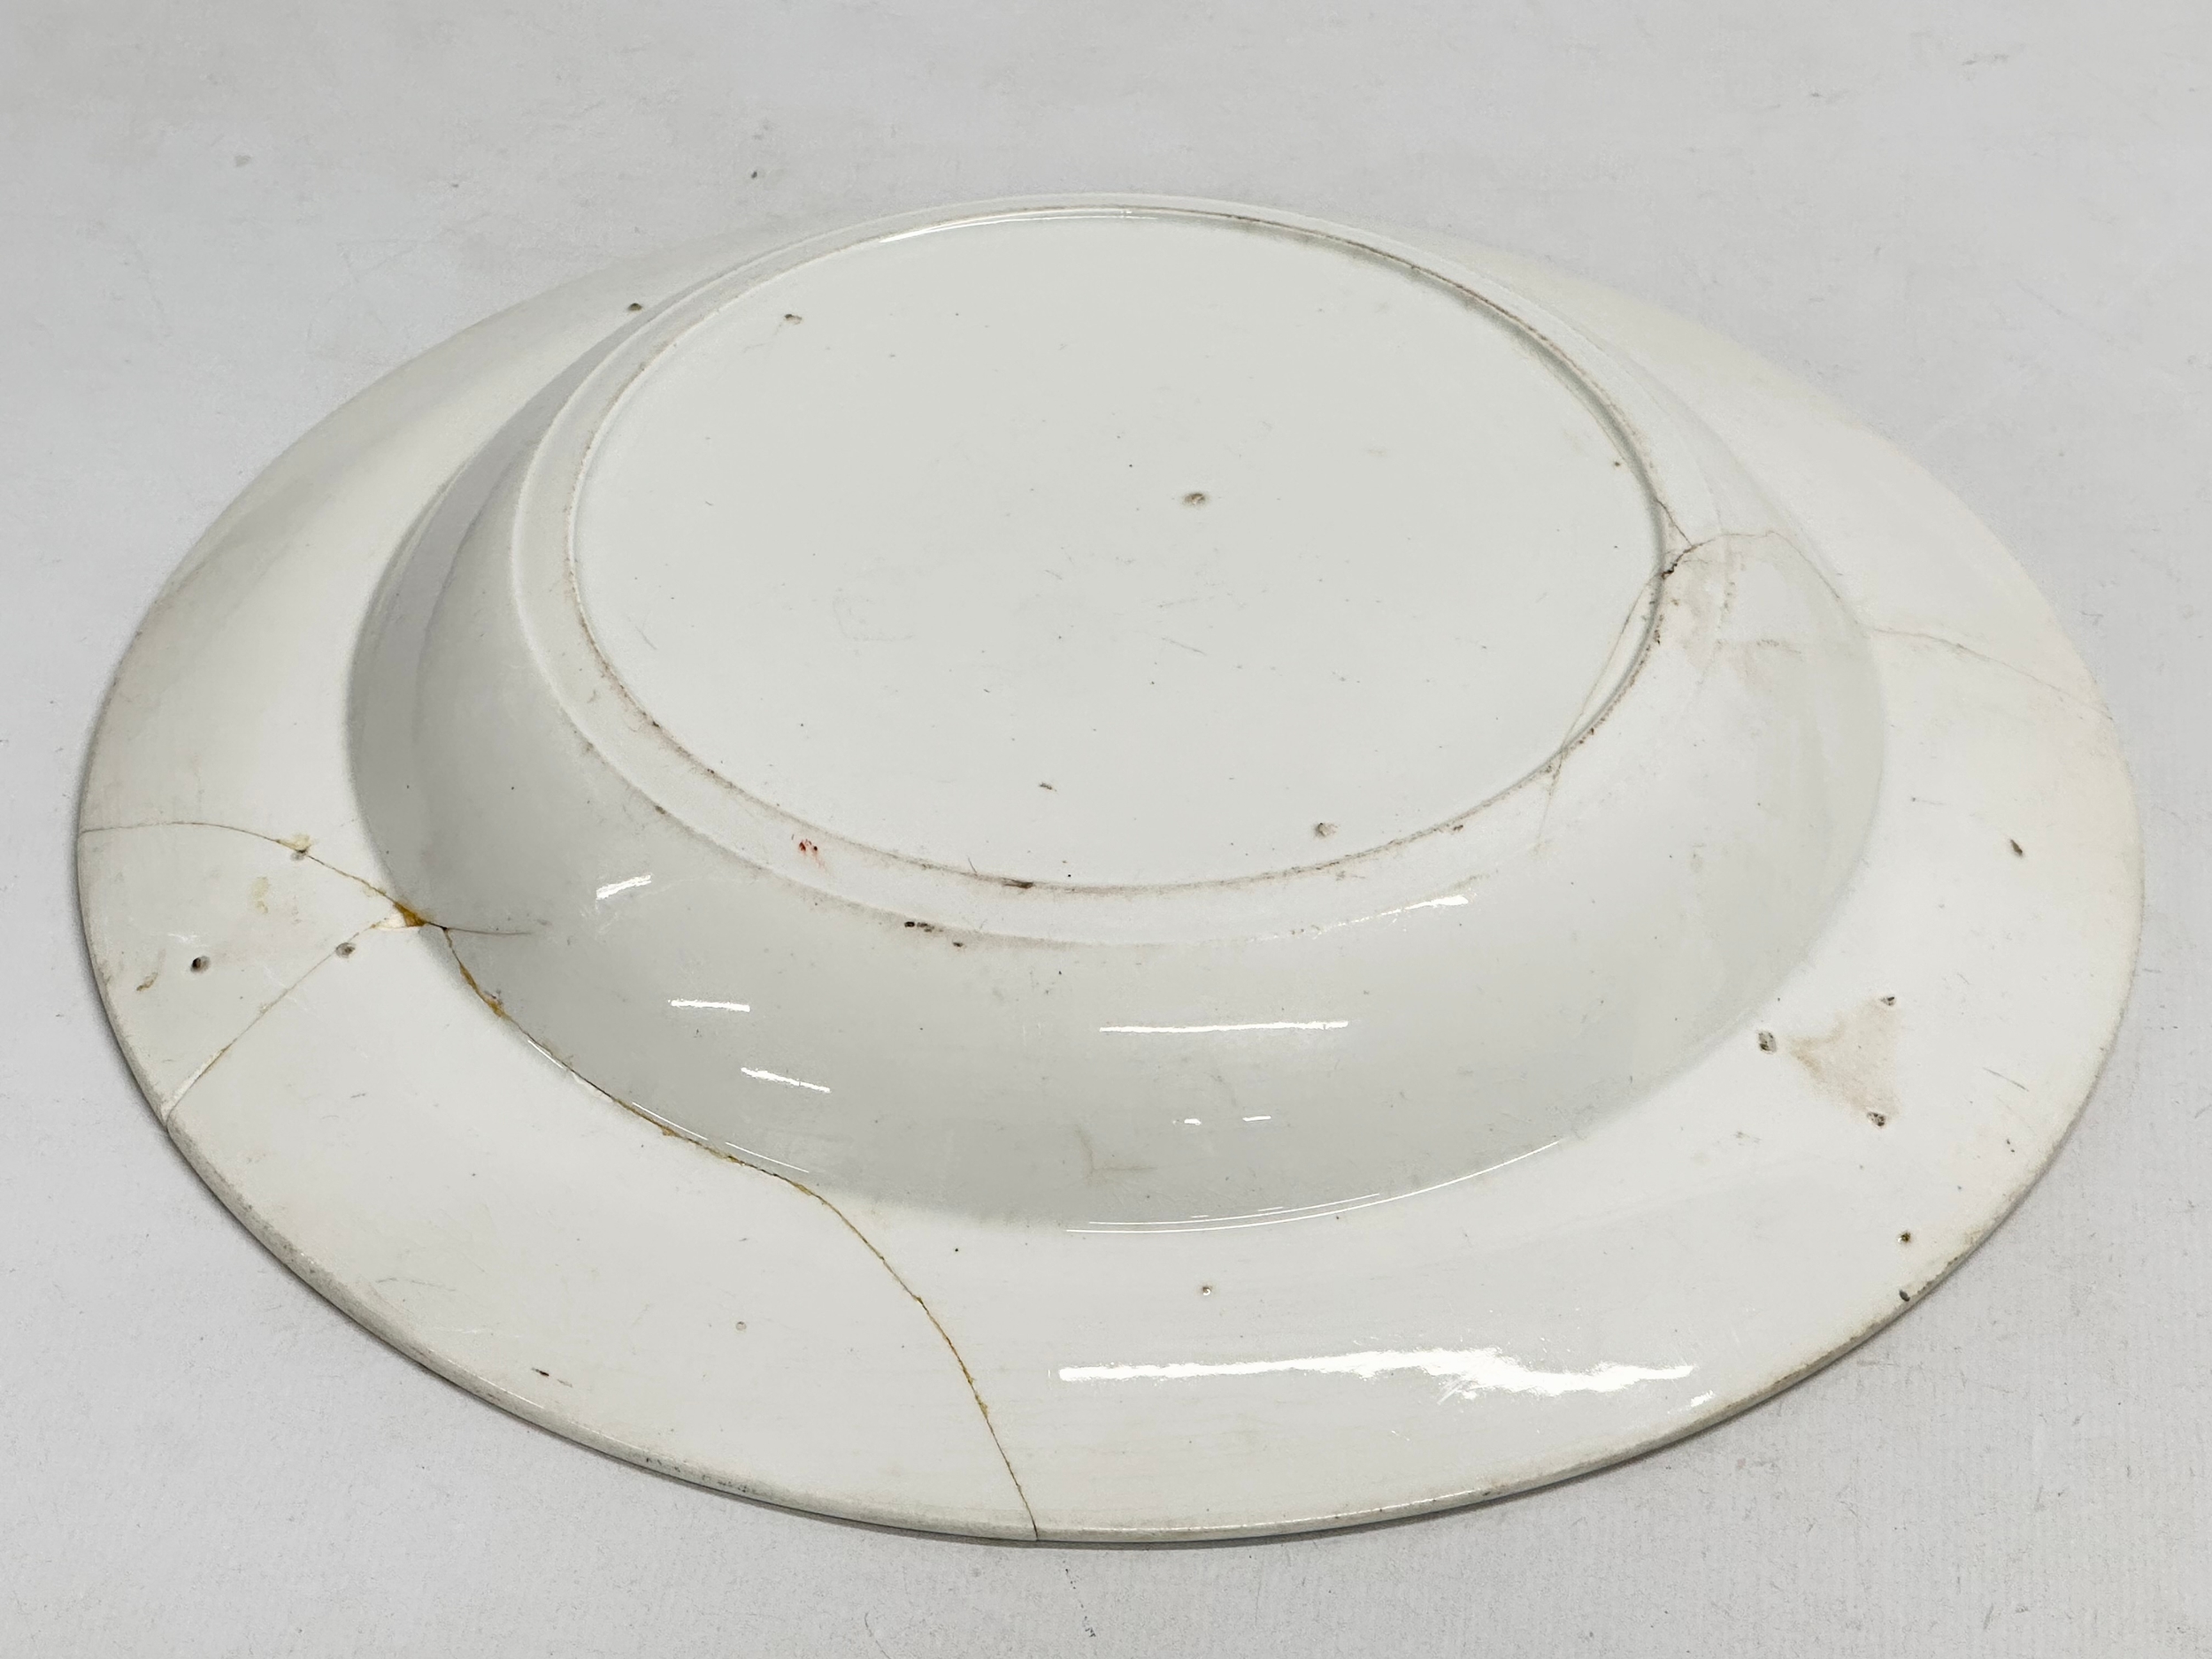 A collection of early/mid 19th century earthenware pottery. Large Italian bowl 30x6.5cm, circa - Image 8 of 15